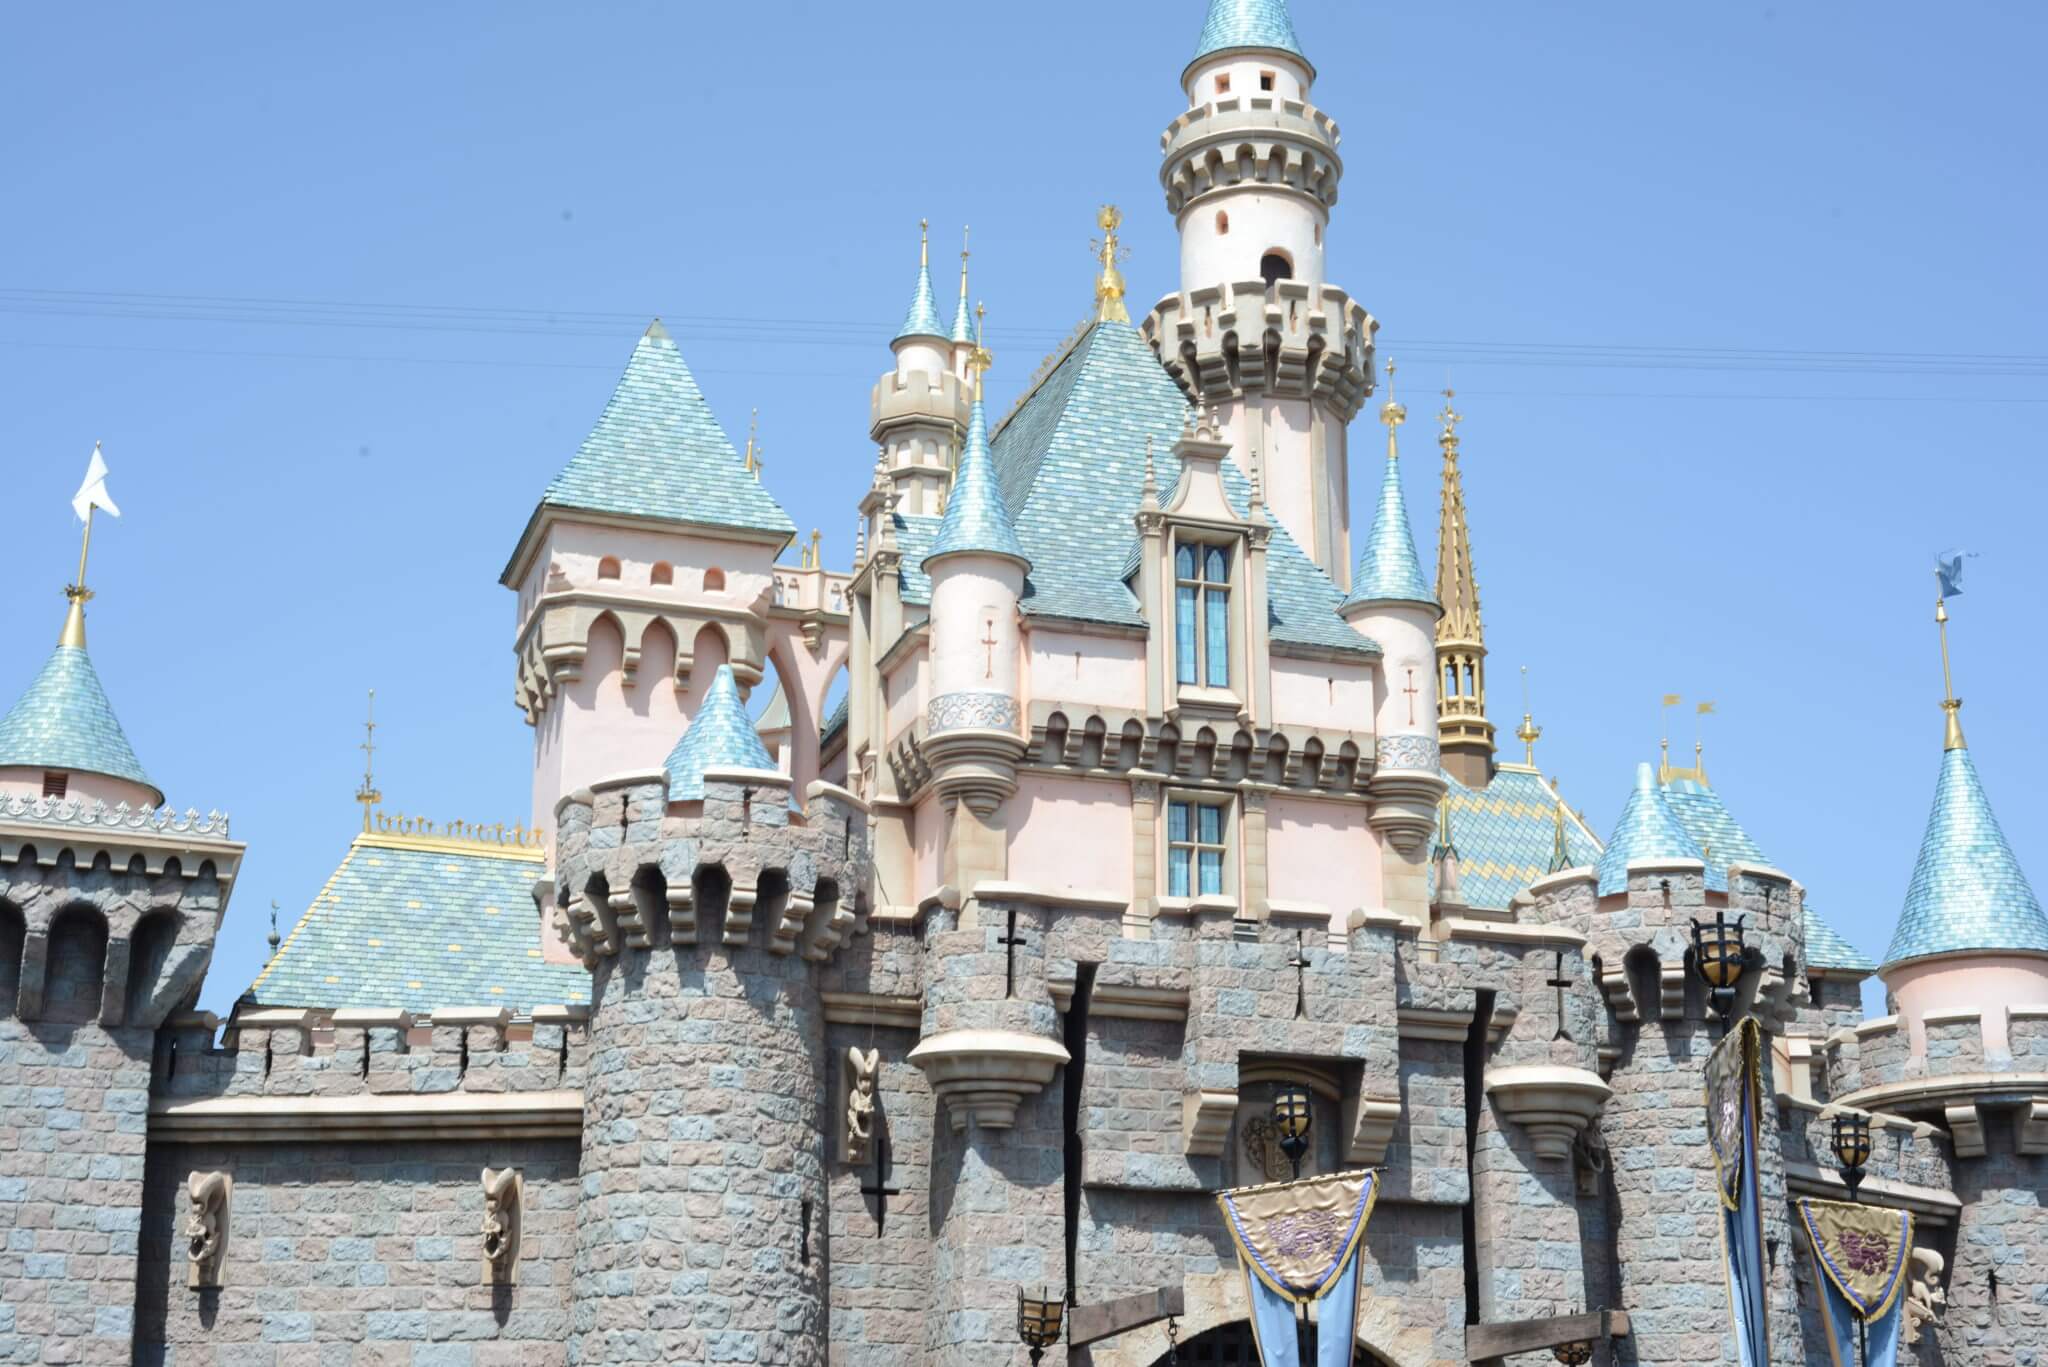 Sleeping Beauty Castle 2019 during the day